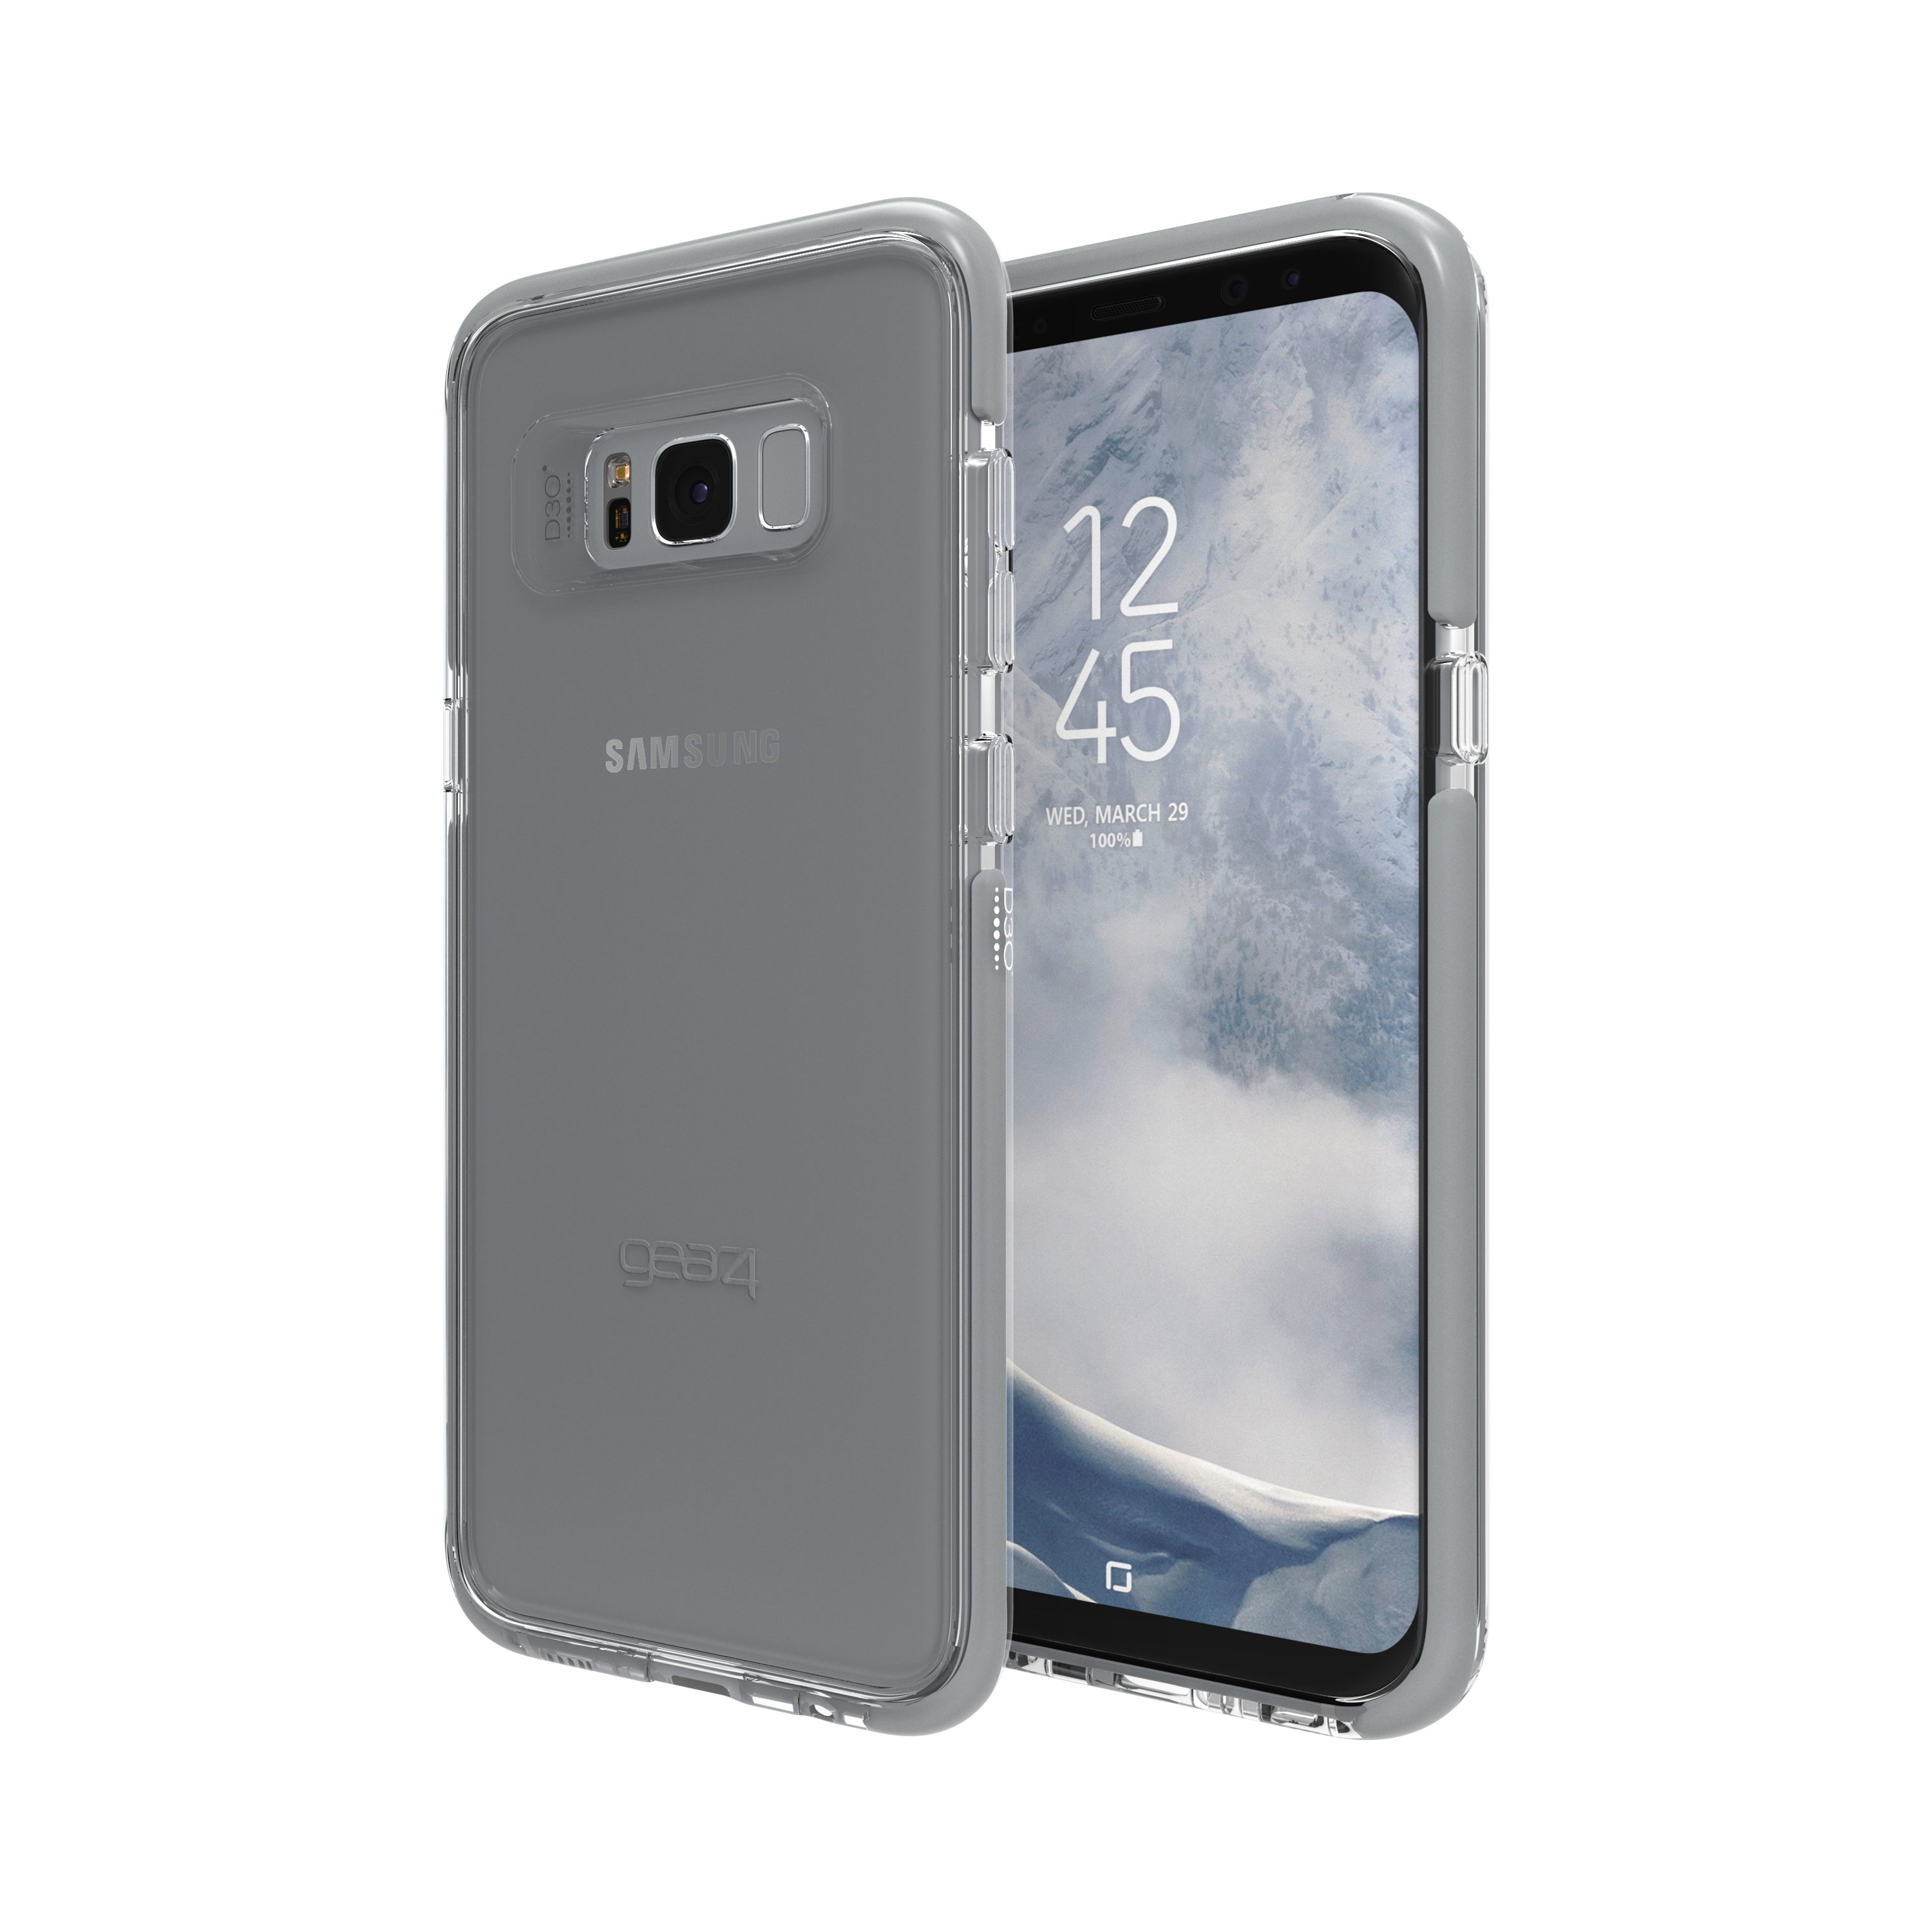 GEAR4 SILVER Backcover, S8+, GALAXY Piccadilly, SAMSUNG,